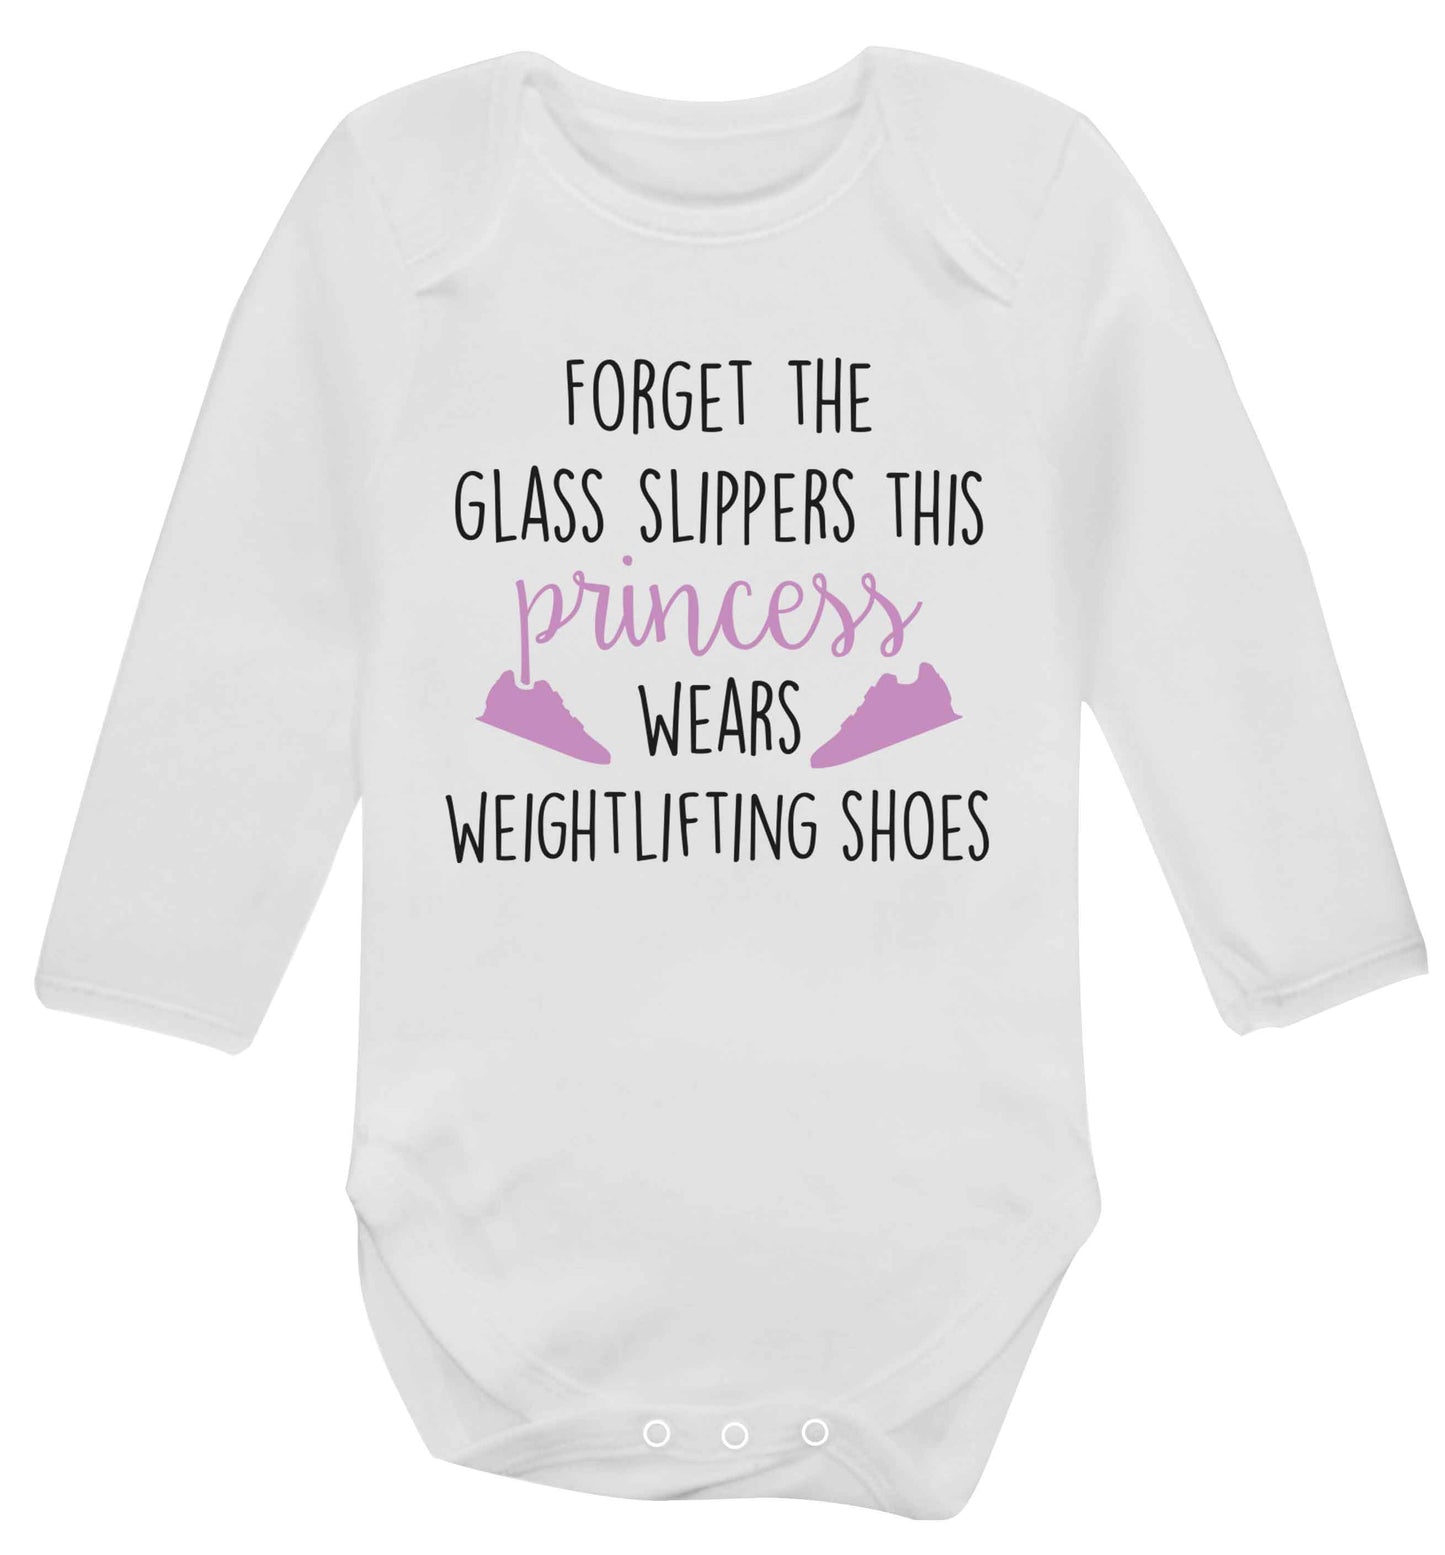 Forget the glass slippers this princess wears weightlifting shoes Baby Vest long sleeved white 6-12 months